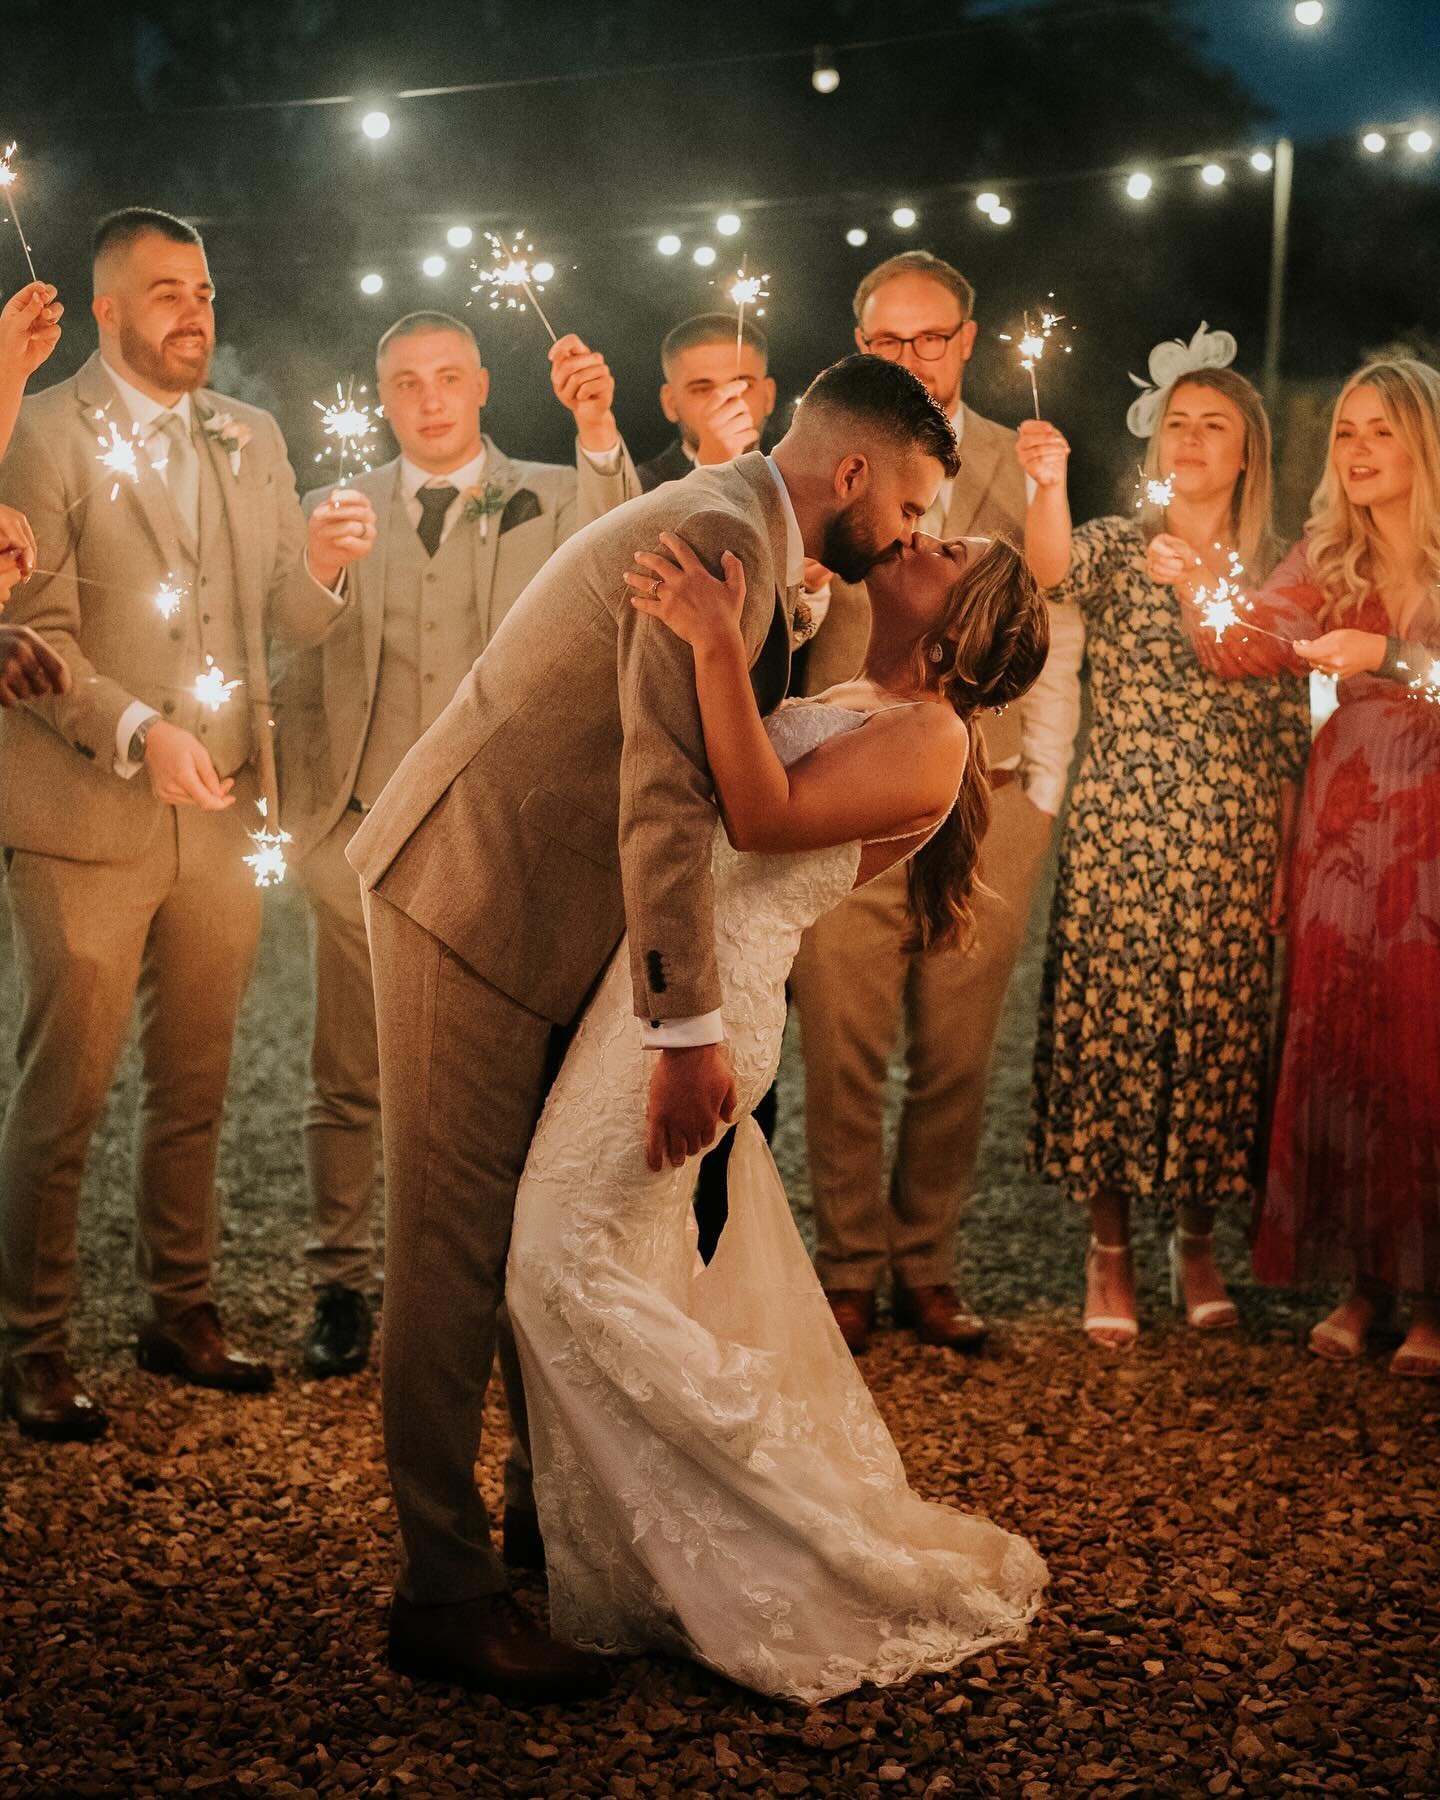 Read this if you&rsquo;re planning on having a sparkler moment at your wedding&hellip;
.
✨ Get the long burn variety. The short (cheap) ones you had as a kid on bonfire night are not going to cut it. 
.
✨ Get a whole bunch of wind proof lighters. Or 